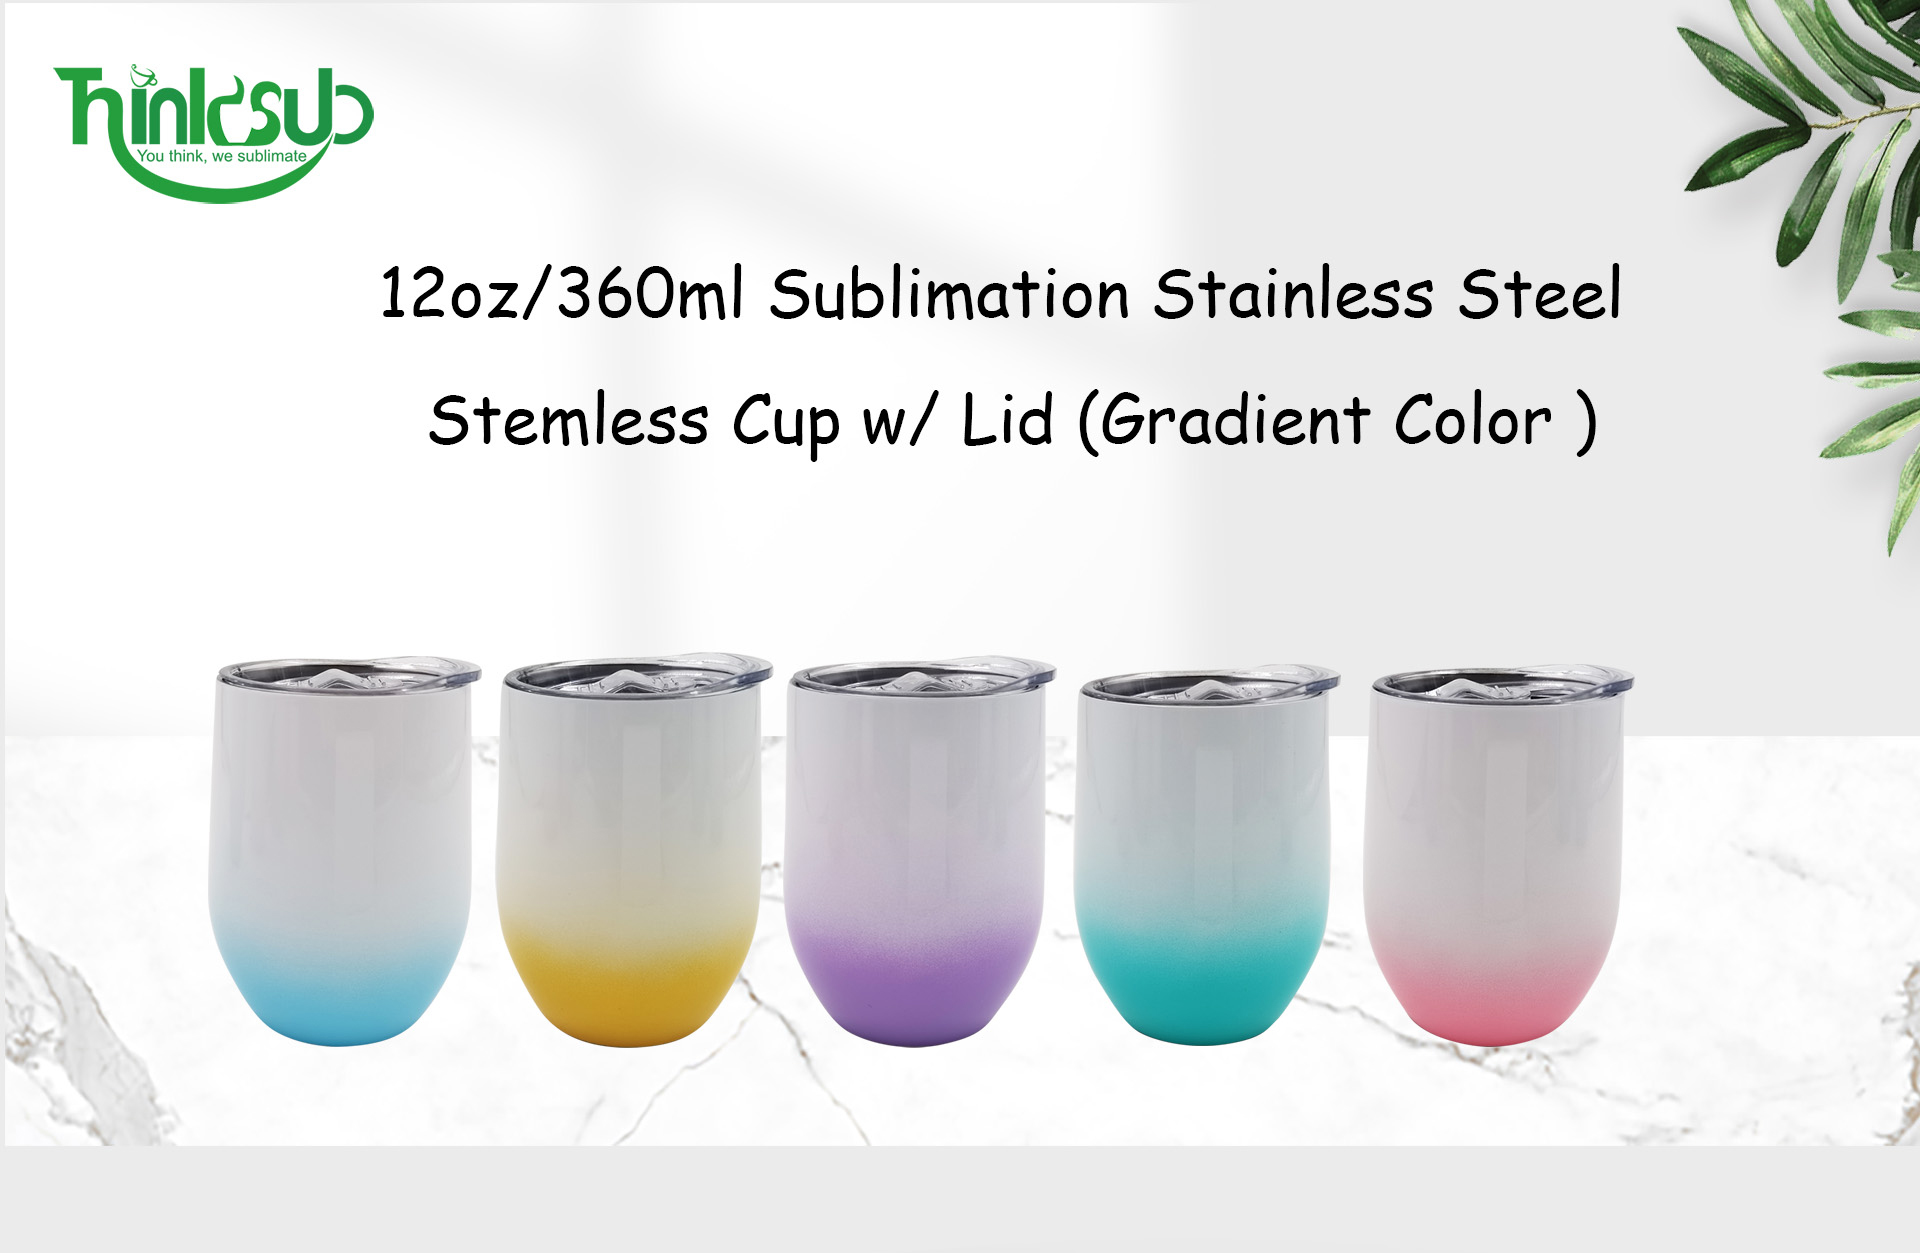  12oz/360ml Sublimation Stainless Steel Stemless Cup w/ Lid (Gradient Color )